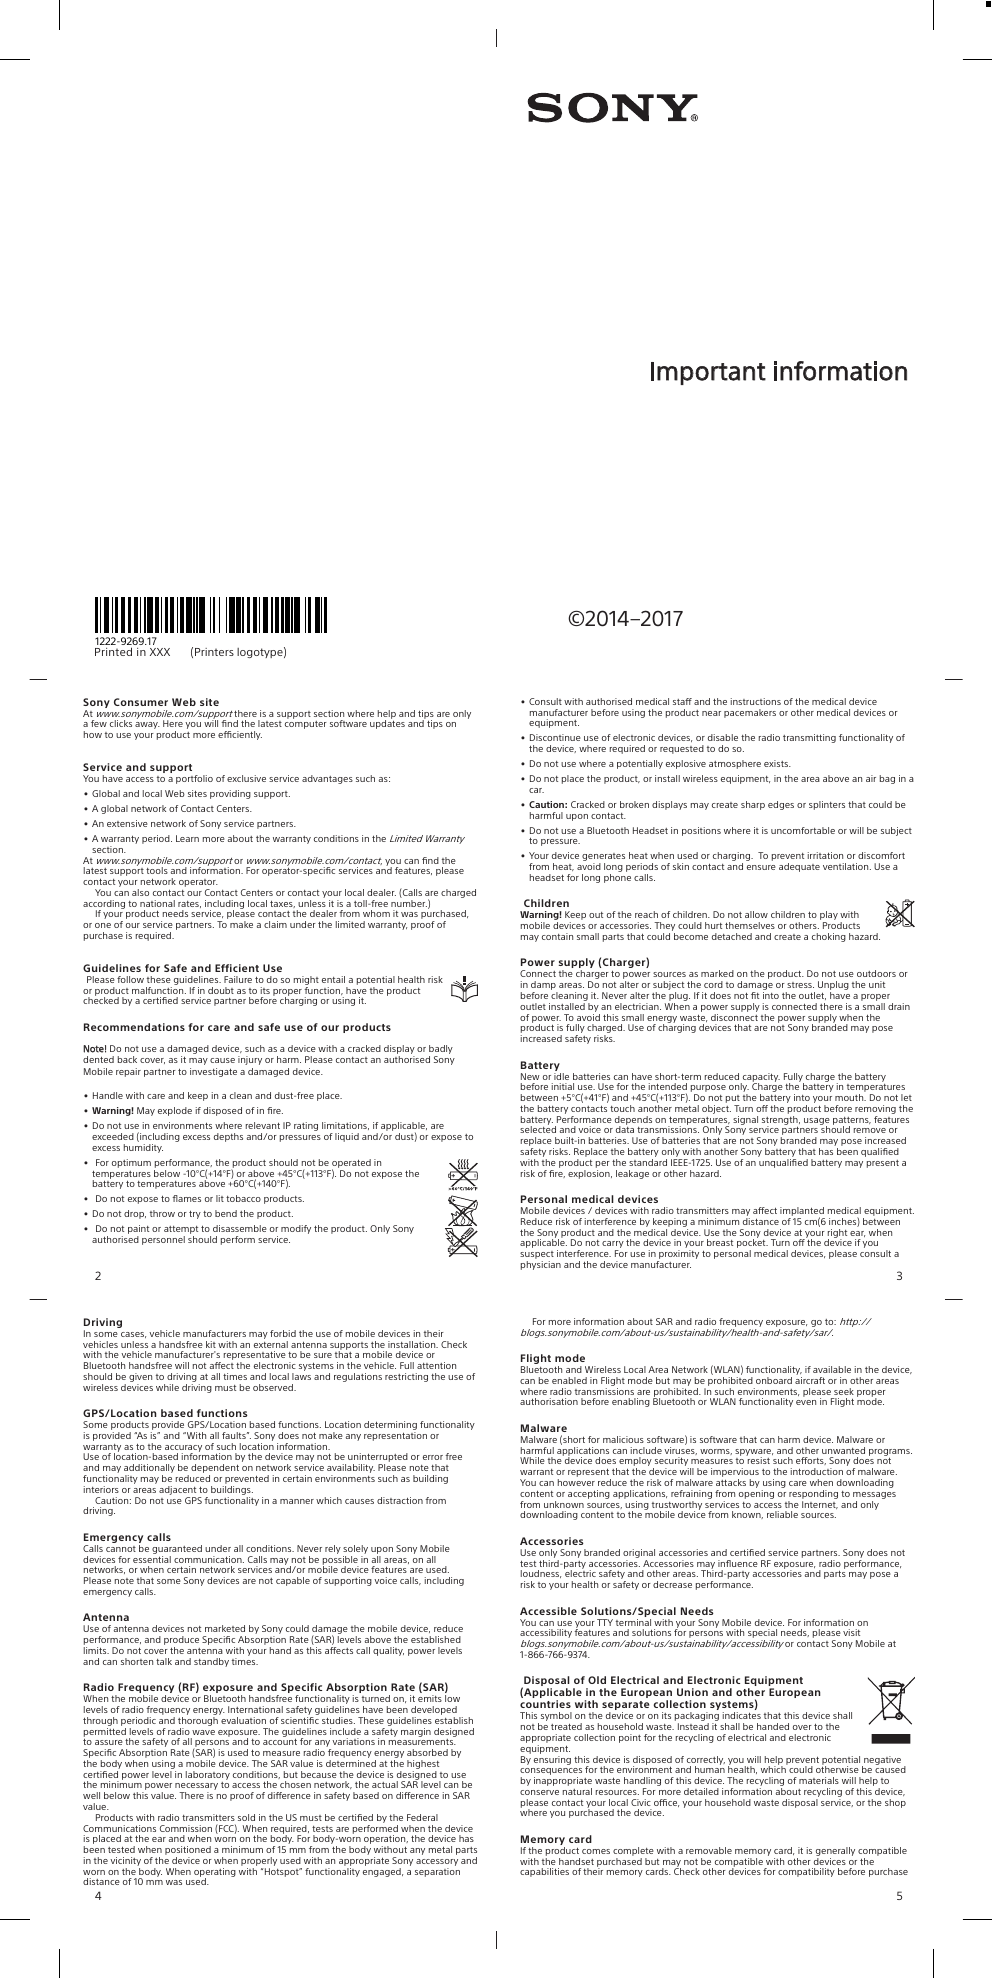 Pri nt ed  in  XXX                                         (Printers     logotype)1222-9269.17©2014–2017Important informationSony Consumer Web siteAt www.sonymobile.com/support there is a support section where help and tips are onlya few clicks away. Here you will ﬁnd the latest computer software updates and tips onhow to use your product more eciently.Service and supportYou have access to a portfolio of exclusive service advantages such as:•Global and local Web sites providing support.•A global network of Contact Centers.•An extensive network of Sony service partners.•A warranty period. Learn more about the warranty conditions in the Limited Warrantysection.At www.sonymobile.com/support or www.sonymobile.com/contact, you can ﬁnd thelatest support tools and information. For operator-speciﬁc services and features, pleasecontact your network operator.You can also contact our Contact Centers or contact your local dealer. (Calls are chargedaccording to national rates, including local taxes, unless it is a toll-free number.)If your product needs service, please contact the dealer from whom it was purchased,or one of our service partners. To make a claim under the limited warranty, proof ofpurchase is required.Guidelines for Safe and Efficient UsePlease follow these guidelines. Failure to do so might entail a potential health riskor product malfunction. If in doubt as to its proper function, have the productchecked by a certiﬁed service partner before charging or using it.Recommendations for care and safe use of our productsNote! Do not use a damaged device, such as a device with a cracked display or badlydented back cover, as it may cause injury or harm. Please contact an authorised SonyMobile repair partner to investigate a damaged device.•Handle with care and keep in a clean and dust-free place.• Warning! May explode if disposed of in ﬁre.•Do not use in environments where relevant IP rating limitations, if applicable, areexceeded (including excess depths and/or pressures of liquid and/or dust) or expose toexcess humidity.•For optimum performance, the product should not be operated intemperatures below -10°C(+14°F) or above +45°C(+113°F). Do not expose thebattery to temperatures above +60°C(+140°F).•Do not expose to ﬂames or lit tobacco products.•Do not drop, throw or try to bend the product.•Do not paint or attempt to disassemble or modify the product. Only Sonyauthorised personnel should perform service.2•Consult with authorised medical sta and the instructions of the medical devicemanufacturer before using the product near pacemakers or other medical devices orequipment.•Discontinue use of electronic devices, or disable the radio transmitting functionality ofthe device, where required or requested to do so.•Do not use where a potentially explosive atmosphere exists.•Do not place the product, or install wireless equipment, in the area above an air bag in acar.• Caution: Cracked or broken displays may create sharp edges or splinters that could beharmful upon contact.•Do not use a Bluetooth Headset in positions where it is uncomfortable or will be subjectto pressure.•Your device generates heat when used or charging.  To prevent irritation or discomfortfrom heat, avoid long periods of skin contact and ensure adequate ventilation. Use aheadset for long phone calls.ChildrenWarning! Keep out of the reach of children. Do not allow children to play withmobile devices or accessories. They could hurt themselves or others. Productsmay contain small parts that could become detached and create a choking hazard.Power supply (Charger)Connect the charger to power sources as marked on the product. Do not use outdoors orin damp areas. Do not alter or subject the cord to damage or stress. Unplug the unitbefore cleaning it. Never alter the plug. If it does not ﬁt into the outlet, have a properoutlet installed by an electrician. When a power supply is connected there is a small drainof power. To avoid this small energy waste, disconnect the power supply when theproduct is fully charged. Use of charging devices that are not Sony branded may poseincreased safety risks.BatteryNew or idle batteries can have short-term reduced capacity. Fully charge the batterybefore initial use. Use for the intended purpose only. Charge the battery in temperaturesbetween +5°C(+41°F) and +45°C(+113°F). Do not put the battery into your mouth. Do not letthe battery contacts touch another metal object. Turn o the product before removing thebattery. Performance depends on temperatures, signal strength, usage patterns, featuresselected and voice or data transmissions. Only Sony service partners should remove orreplace built-in batteries. Use of batteries that are not Sony branded may pose increasedsafety risks. Replace the battery only with another Sony battery that has been qualiﬁedwith the product per the standard IEEE-1725. Use of an unqualiﬁed battery may present arisk of ﬁre, explosion, leakage or other hazard.Personal medical devicesMobile devices / devices with radio transmitters may aect implanted medical equipment.Reduce risk of interference by keeping a minimum distance of 15 cm(6 inches) betweenthe Sony product and the medical device. Use the Sony device at your right ear, whenapplicable. Do not carry the device in your breast pocket. Turn o the device if yoususpect interference. For use in proximity to personal medical devices, please consult aphysician and the device manufacturer.3DrivingIn some cases, vehicle manufacturers may forbid the use of mobile devices in theirvehicles unless a handsfree kit with an external antenna supports the installation. Checkwith the vehicle manufacturer&apos;s representative to be sure that a mobile device orBluetooth handsfree will not aect the electronic systems in the vehicle. Full attentionshould be given to driving at all times and local laws and regulations restricting the use ofwireless devices while driving must be observed.GPS/Location based functionsSome products provide GPS/Location based functions. Location determining functionalityis provided “As is” and “With all faults”. Sony does not make any representation orwarranty as to the accuracy of such location information.Use of location-based information by the device may not be uninterrupted or error freeand may additionally be dependent on network service availability. Please note thatfunctionality may be reduced or prevented in certain environments such as buildinginteriors or areas adjacent to buildings.Caution: Do not use GPS functionality in a manner which causes distraction fromdriving.Emergency callsCalls cannot be guaranteed under all conditions. Never rely solely upon Sony Mobiledevices for essential communication. Calls may not be possible in all areas, on allnetworks, or when certain network services and/or mobile device features are used.Please note that some Sony devices are not capable of supporting voice calls, includingemergency calls.AntennaUse of antenna devices not marketed by Sony could damage the mobile device, reduceperformance, and produce Speciﬁc Absorption Rate (SAR) levels above the establishedlimits. Do not cover the antenna with your hand as this aects call quality, power levelsand can shorten talk and standby times.Radio Frequency (RF) exposure and Specific Absorption Rate (SAR)When the mobile device or Bluetooth handsfree functionality is turned on, it emits lowlevels of radio frequency energy. International safety guidelines have been developedthrough periodic and thorough evaluation of scientiﬁc studies. These guidelines establishpermitted levels of radio wave exposure. The guidelines include a safety margin designedto assure the safety of all persons and to account for any variations in measurements.Speciﬁc Absorption Rate (SAR) is used to measure radio frequency energy absorbed bythe body when using a mobile device. The SAR value is determined at the highestcertiﬁed power level in laboratory conditions, but because the device is designed to usethe minimum power necessary to access the chosen network, the actual SAR level can bewell below this value. There is no proof of dierence in safety based on dierence in SARvalue.Products with radio transmitters sold in the US must be certiﬁed by the FederalCommunications Commission (FCC). When required, tests are performed when the deviceis placed at the ear and when worn on the body. For body-worn operation, the device hasbeen tested when positioned a minimum of 15 mm from the body without any metal partsin the vicinity of the device or when properly used with an appropriate Sony accessory andworn on the body. When operating with “Hotspot” functionality engaged, a separationdistance of 10 mm was used.4For more information about SAR and radio frequency exposure, go to: http://blogs.sonymobile.com/about-us/sustainability/health-and-safety/sar/.Flight modeBluetooth and Wireless Local Area Network (WLAN) functionality, if available in the device,can be enabled in Flight mode but may be prohibited onboard aircraft or in other areaswhere radio transmissions are prohibited. In such environments, please seek properauthorisation before enabling Bluetooth or WLAN functionality even in Flight mode.MalwareMalware (short for malicious software) is software that can harm device. Malware orharmful applications can include viruses, worms, spyware, and other unwanted programs.While the device does employ security measures to resist such eorts, Sony does notwarrant or represent that the device will be impervious to the introduction of malware.You can however reduce the risk of malware attacks by using care when downloadingcontent or accepting applications, refraining from opening or responding to messagesfrom unknown sources, using trustworthy services to access the Internet, and onlydownloading content to the mobile device from known, reliable sources.AccessoriesUse only Sony branded original accessories and certiﬁed service partners. Sony does nottest third-party accessories. Accessories may inﬂuence RF exposure, radio performance,loudness, electric safety and other areas. Third-party accessories and parts may pose arisk to your health or safety or decrease performance.Accessible Solutions/Special NeedsYou can use your TTY terminal with your Sony Mobile device. For information onaccessibility features and solutions for persons with special needs, please visitblogs.sonymobile.com/about-us/sustainability/accessibility or contact Sony Mobile at1-866-766-9374.Disposal of Old Electrical and Electronic Equipment(Applicable in the European Union and other Europeancountries with separate collection systems)This symbol on the device or on its packaging indicates that this device shallnot be treated as household waste. Instead it shall be handed over to theappropriate collection point for the recycling of electrical and electronicequipment.By ensuring this device is disposed of correctly, you will help prevent potential negativeconsequences for the environment and human health, which could otherwise be causedby inappropriate waste handling of this device. The recycling of materials will help toconserve natural resources. For more detailed information about recycling of this device,please contact your local Civic oce, your household waste disposal service, or the shopwhere you purchased the device.Memory cardIf the product comes complete with a removable memory card, it is generally compatiblewith the handset purchased but may not be compatible with other devices or thecapabilities of their memory cards. Check other devices for compatibility before purchase5